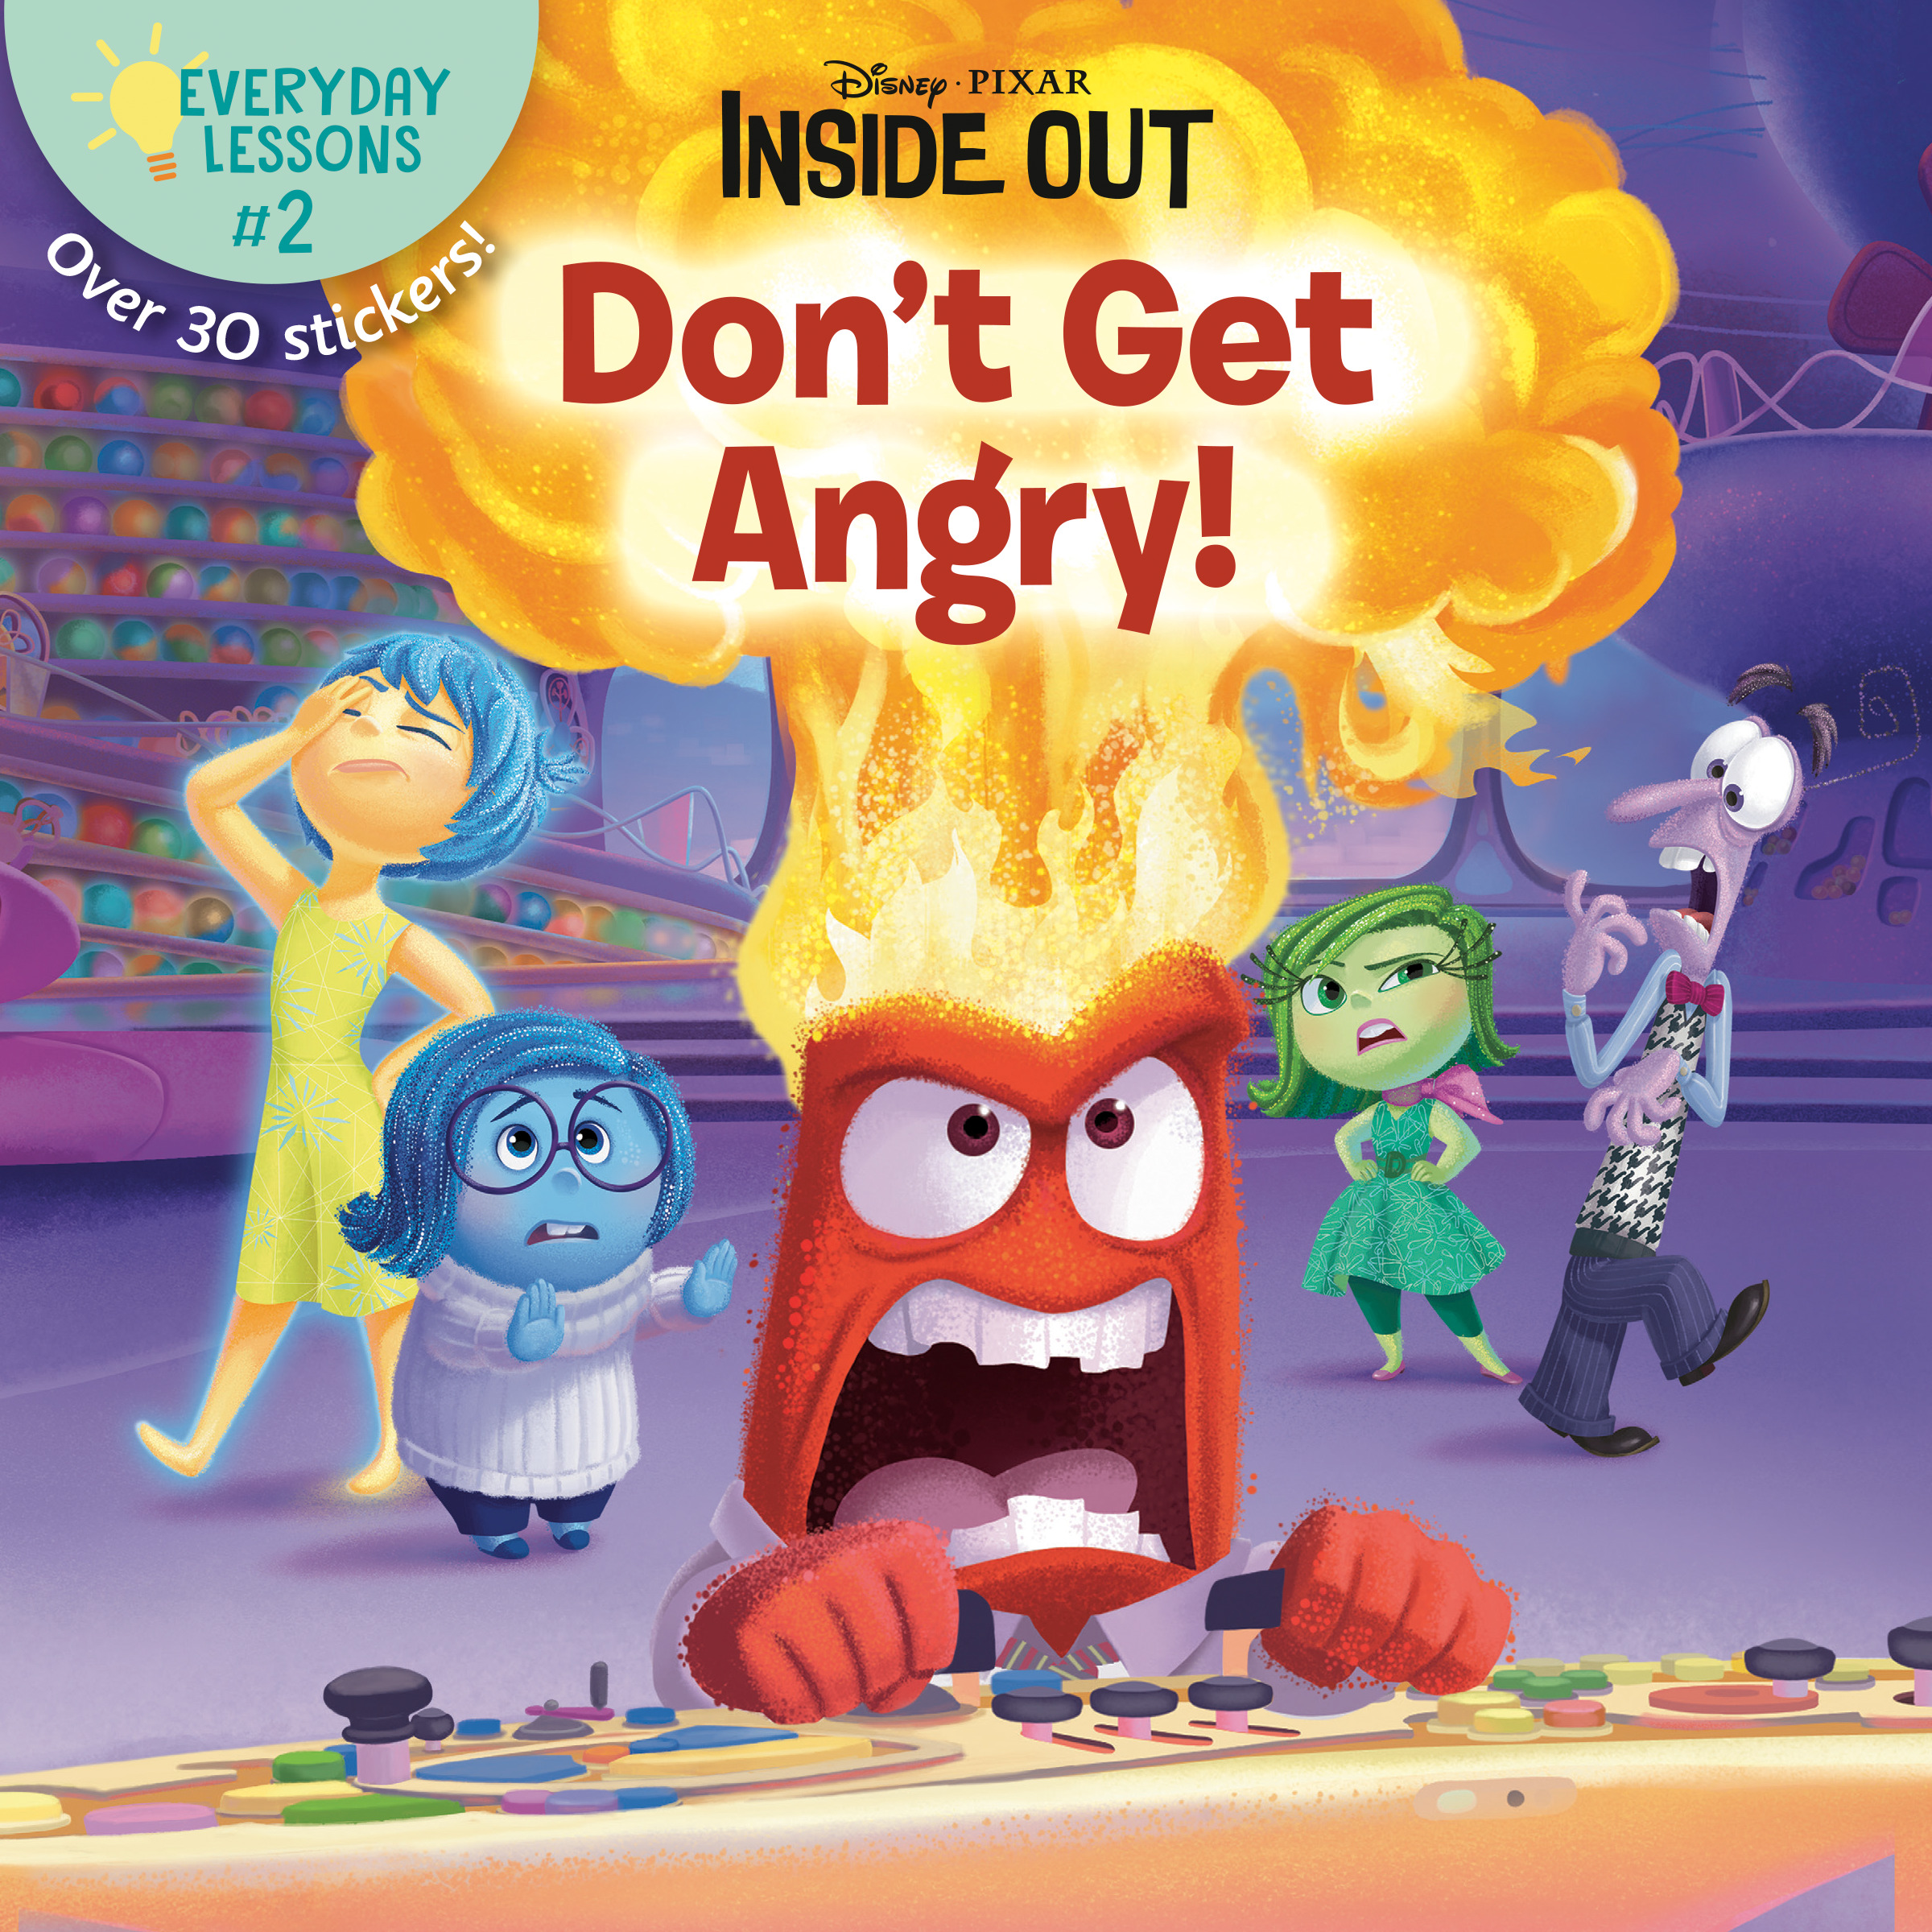 Everyday Lessons #2: Don't Get Angry! (Disney/Pixar Inside Out) | 